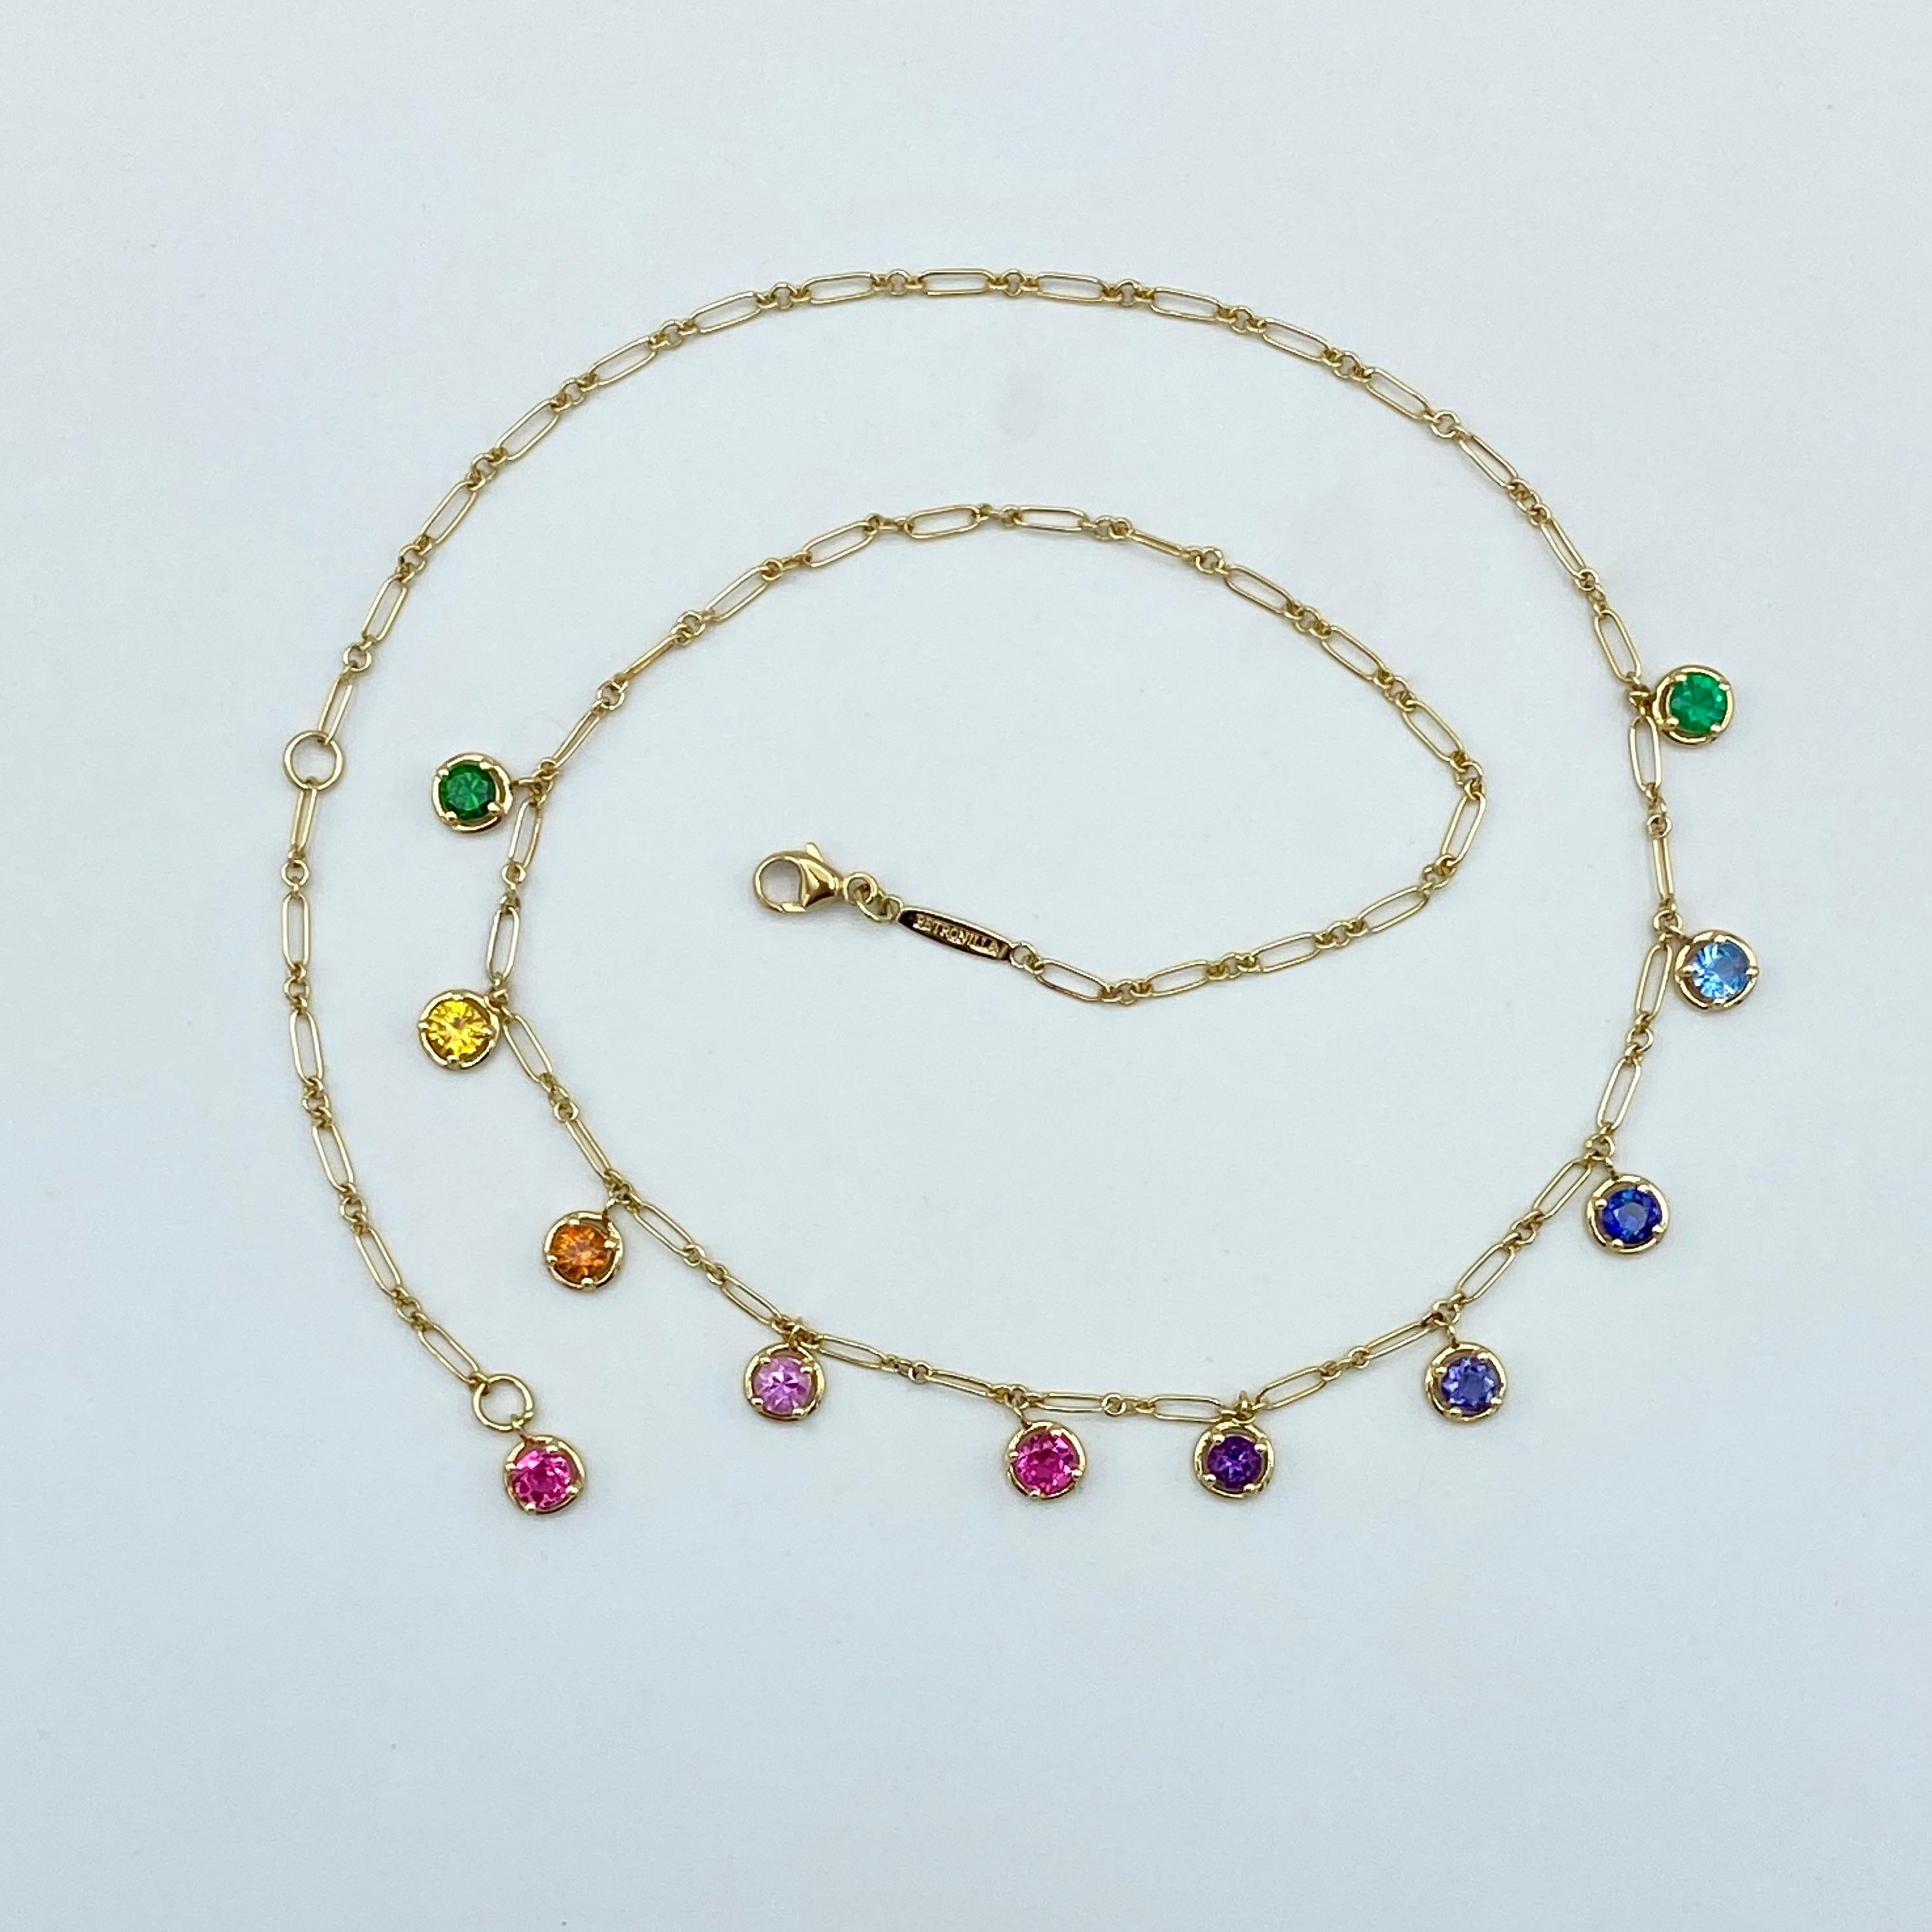 Rainbow Aquamarine Emerald Sapphire Gemstone Handmade Necklace 18 Kt Gold

This necklace is handmade in yellow gold.
I wanted to create this chain with ten precious stones of different colors scaled: from green tsavorite to emerald green through